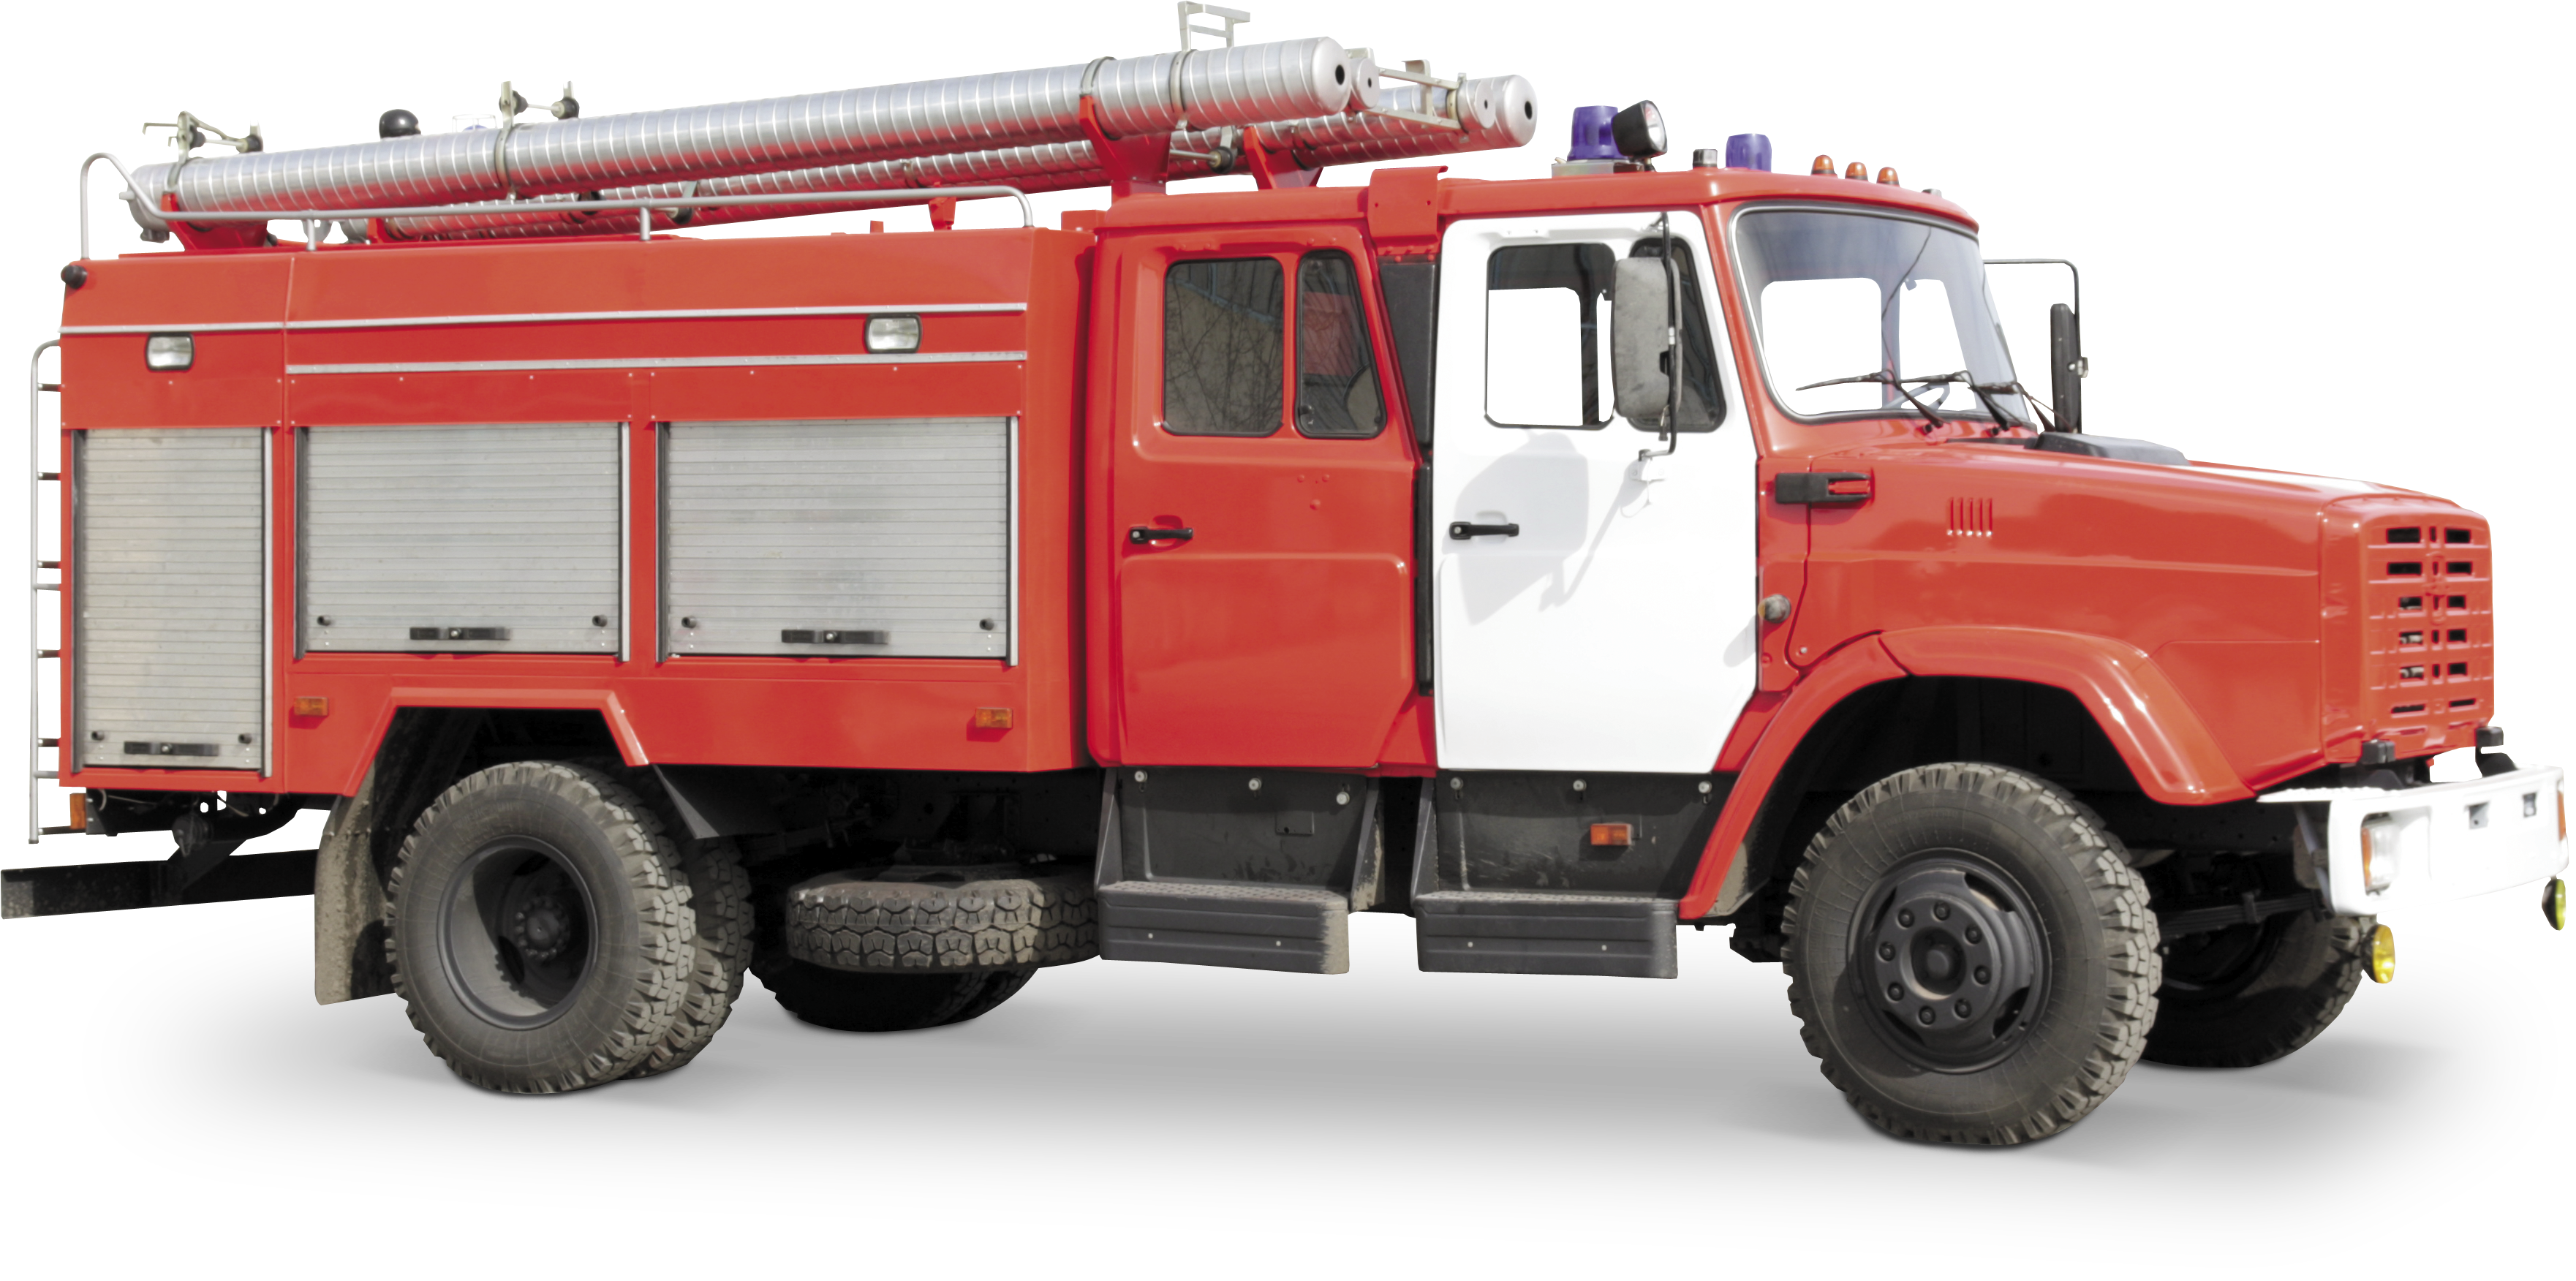 Fire truck PNG images free download, fire engine PNG